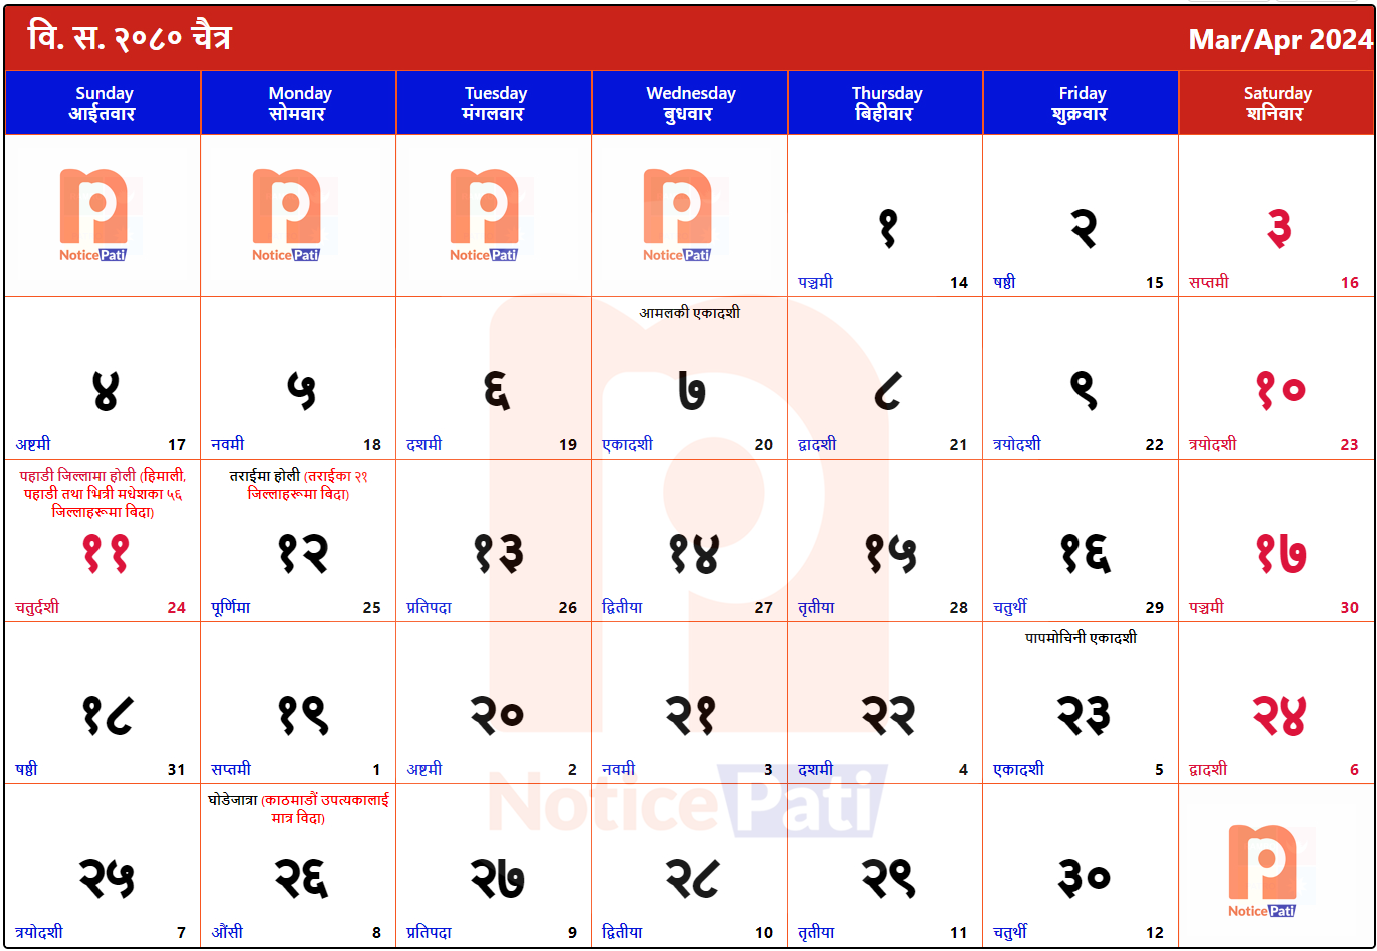 Nepali Patro (Nepali Calendar) 2080 for the month of Chaitra